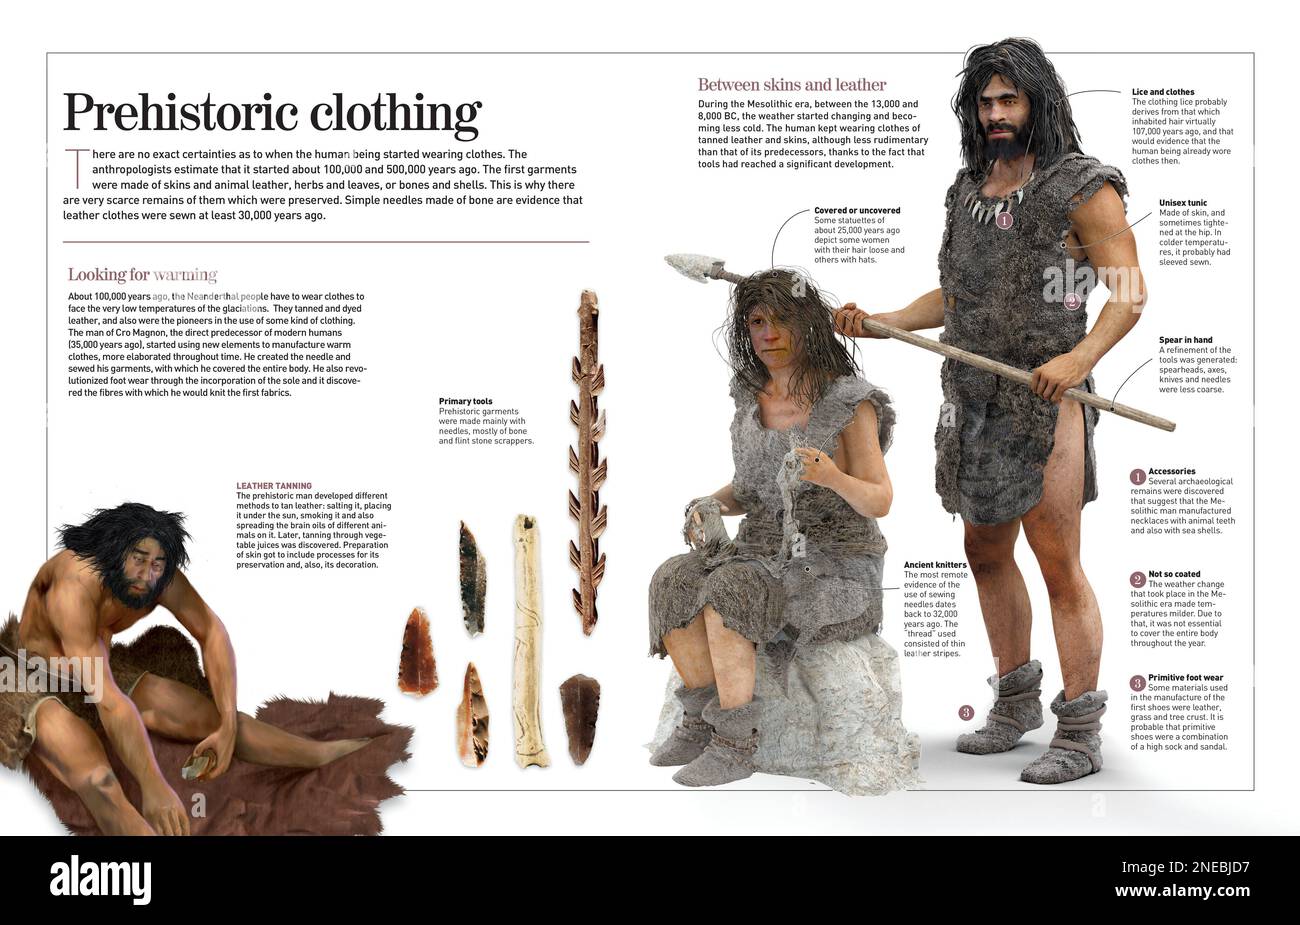 Infographic about prehistoric clothing (100,000 to 5,000 years ago) and how it evolved over time. [Adobe InDesign (.indd); 4960x3188]. Stock Photo